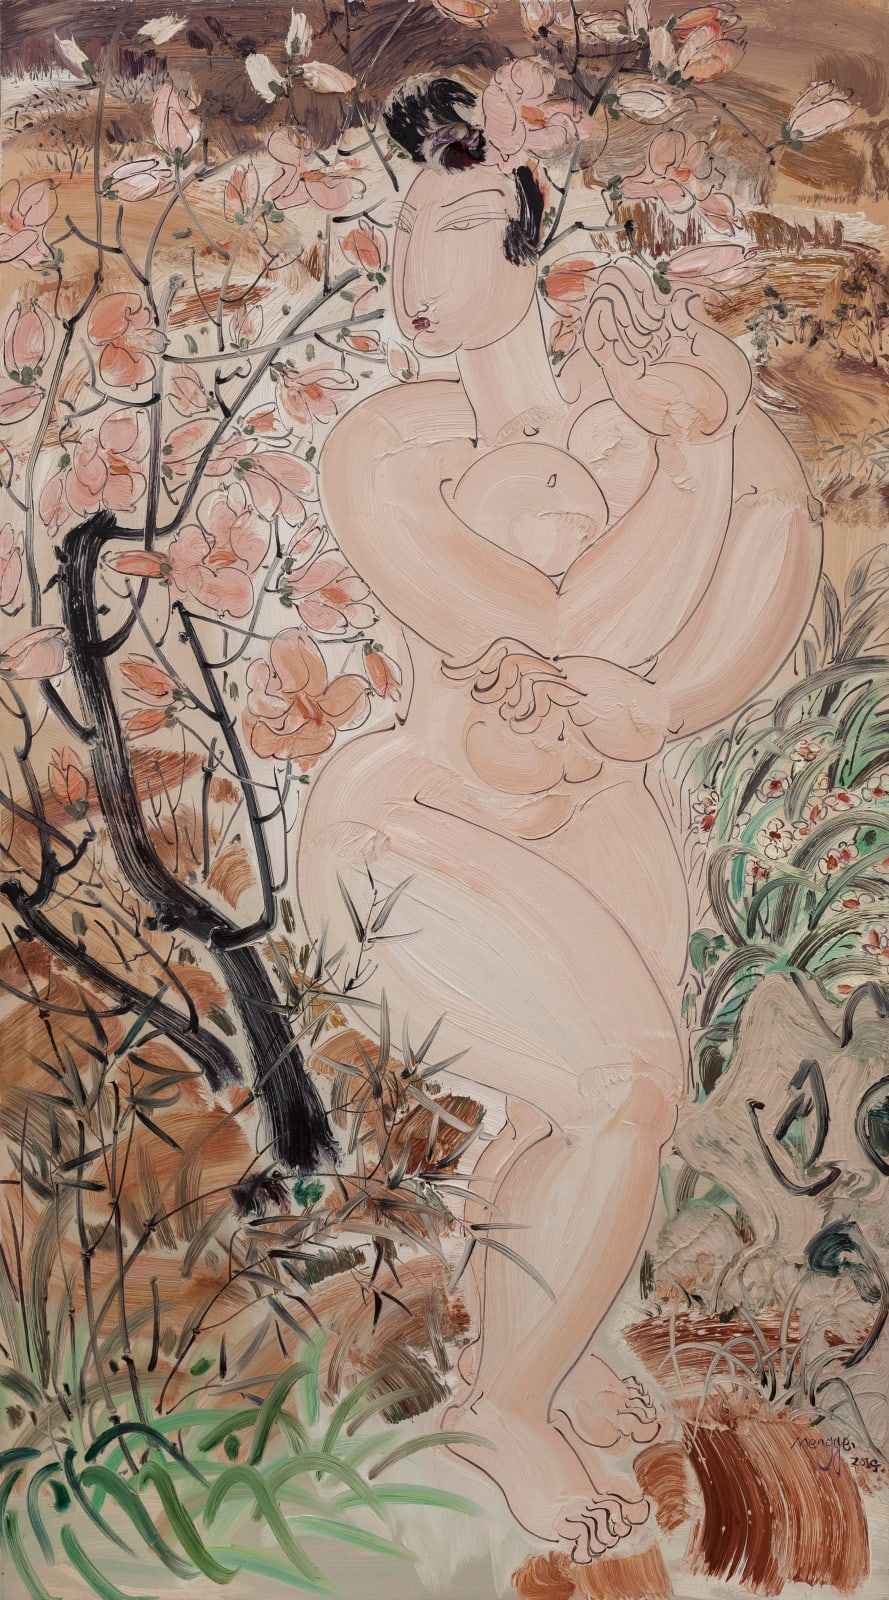 Zhao Mengge 赵梦歌, Thirteen Noble Beauties of Moral Integrity - Delight Orchid, 2014